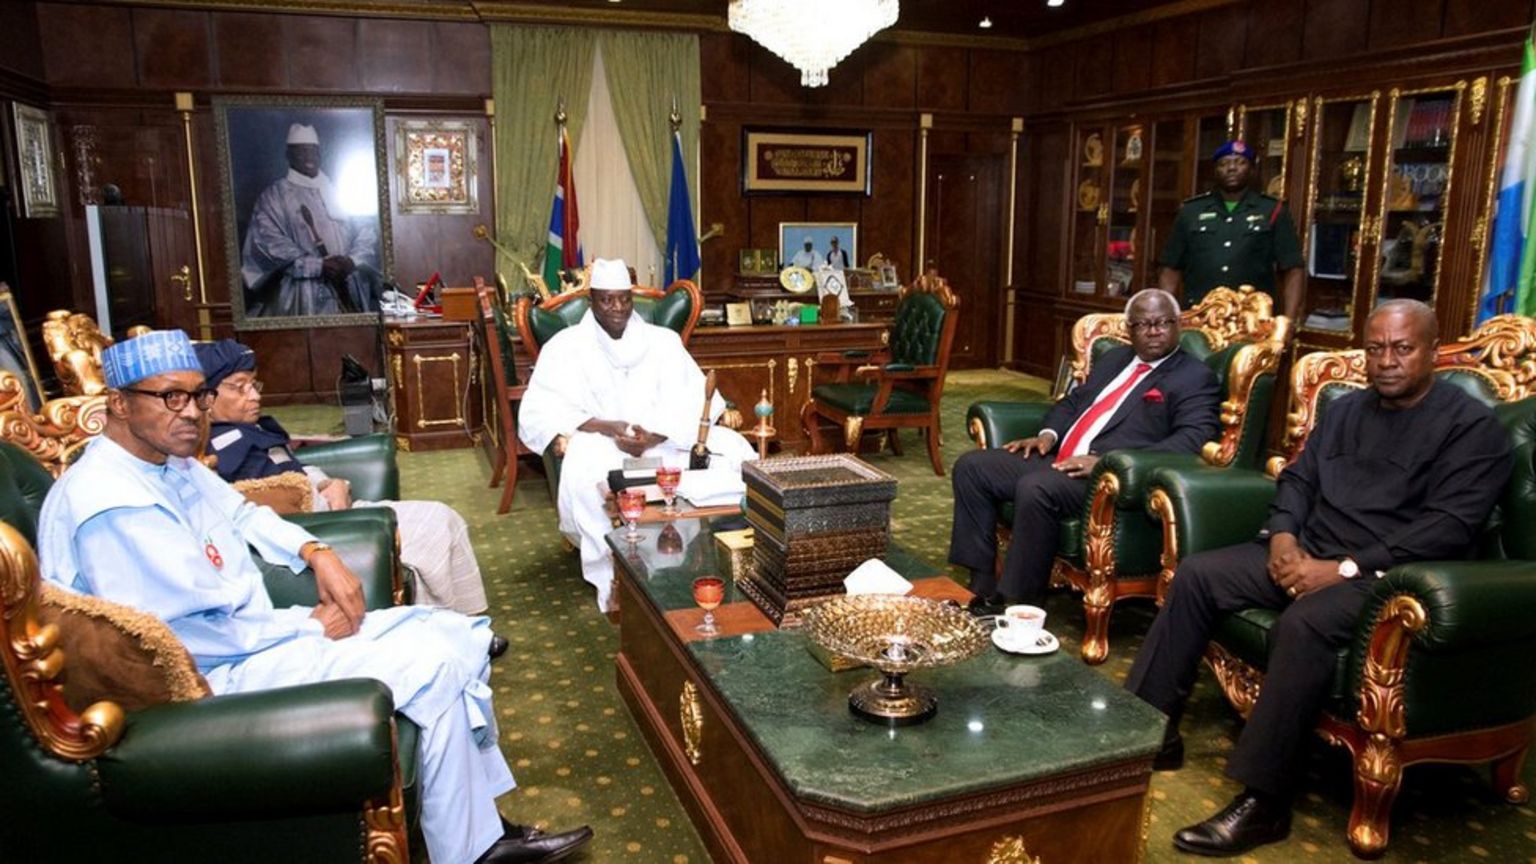 Gambian President Yahya Jammeh attends a meeting with a delegation of West African leaders during the election crisis mediation at the presidential palace in Banjul, Gambia December 13, 2016